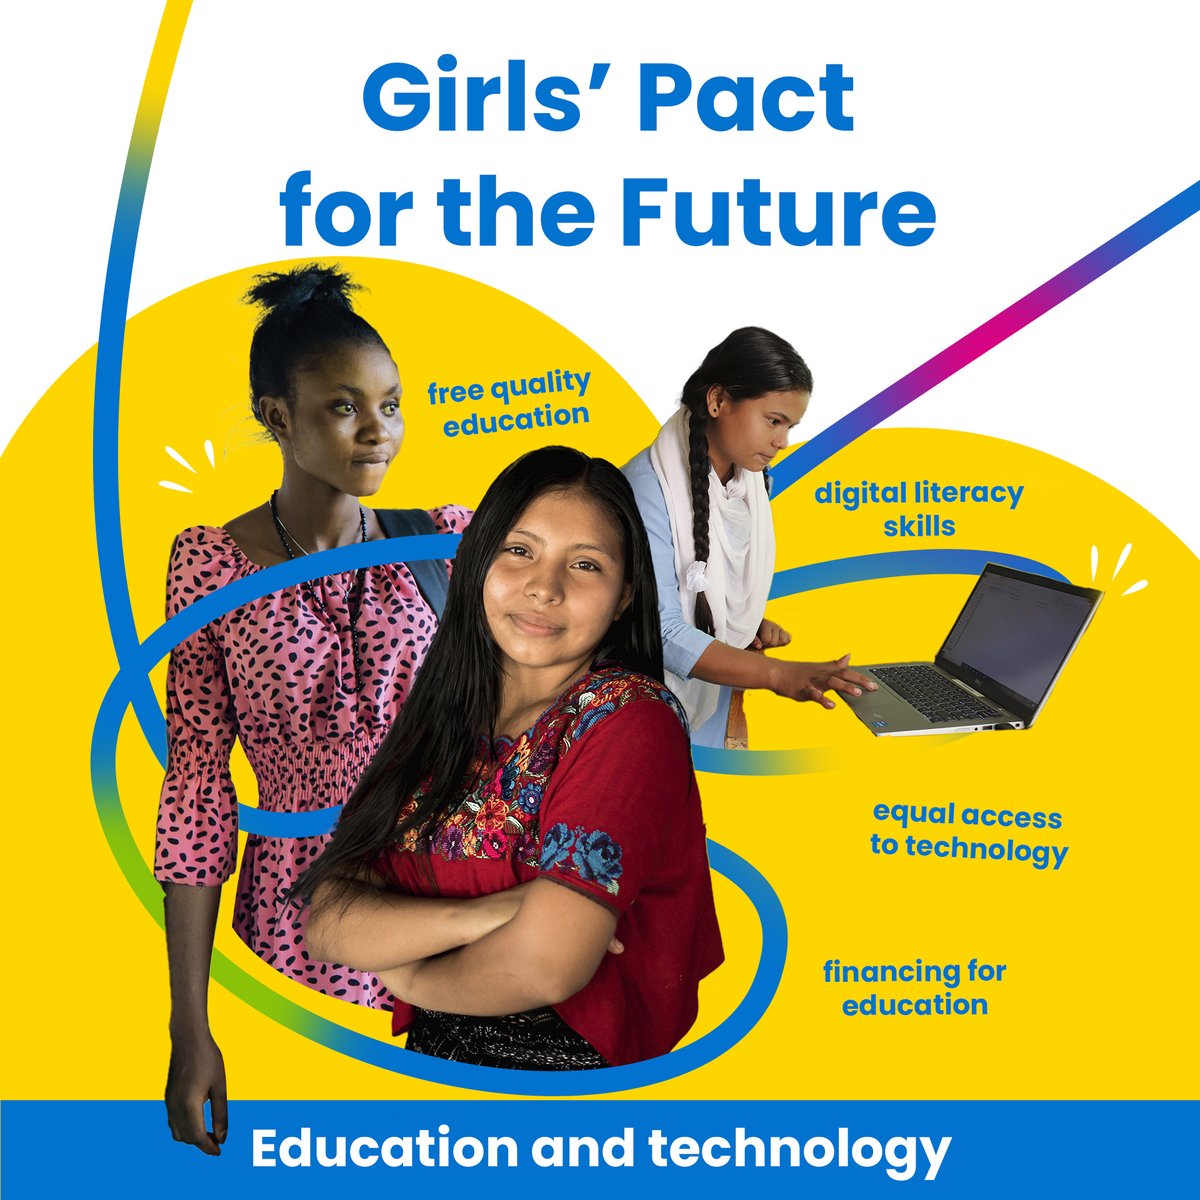 In the Girls’ Pact for the Future, young people are demanding that world leaders ensure equal access to quality free education by eliminating all barriers that prevent girls from attending school